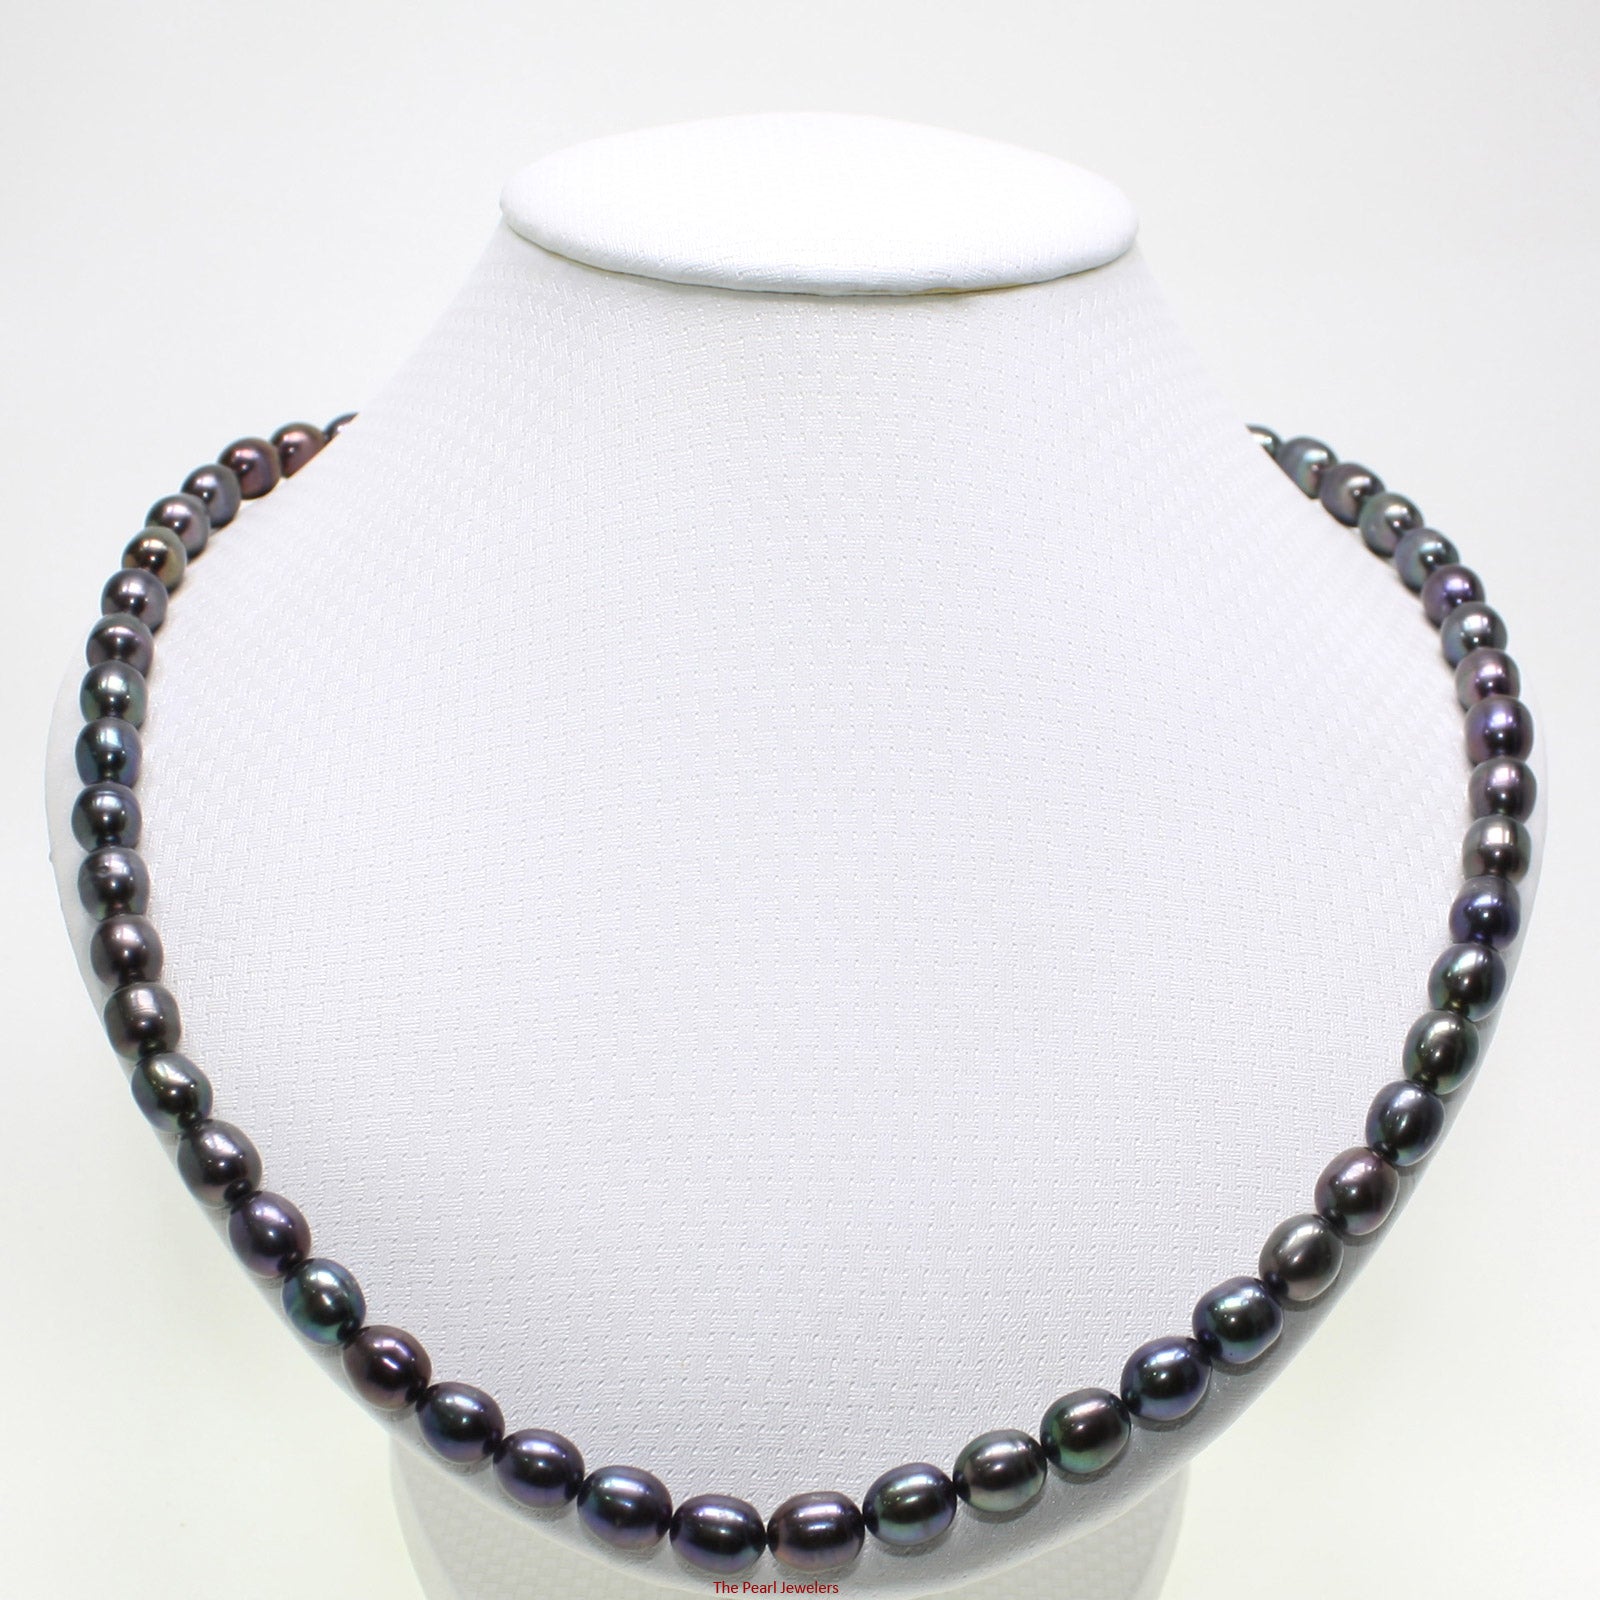 Mandos Jewellery - Entirely handcrafted fresh water pearl and hematite  necklace on fishing line, with a silver 925 clasp and extension. 💌Acs  delivery across Cyprus 🌍Worldwide shipping #handcraftedjewelry  #freshwaterpearls #hematite #blackandwhite